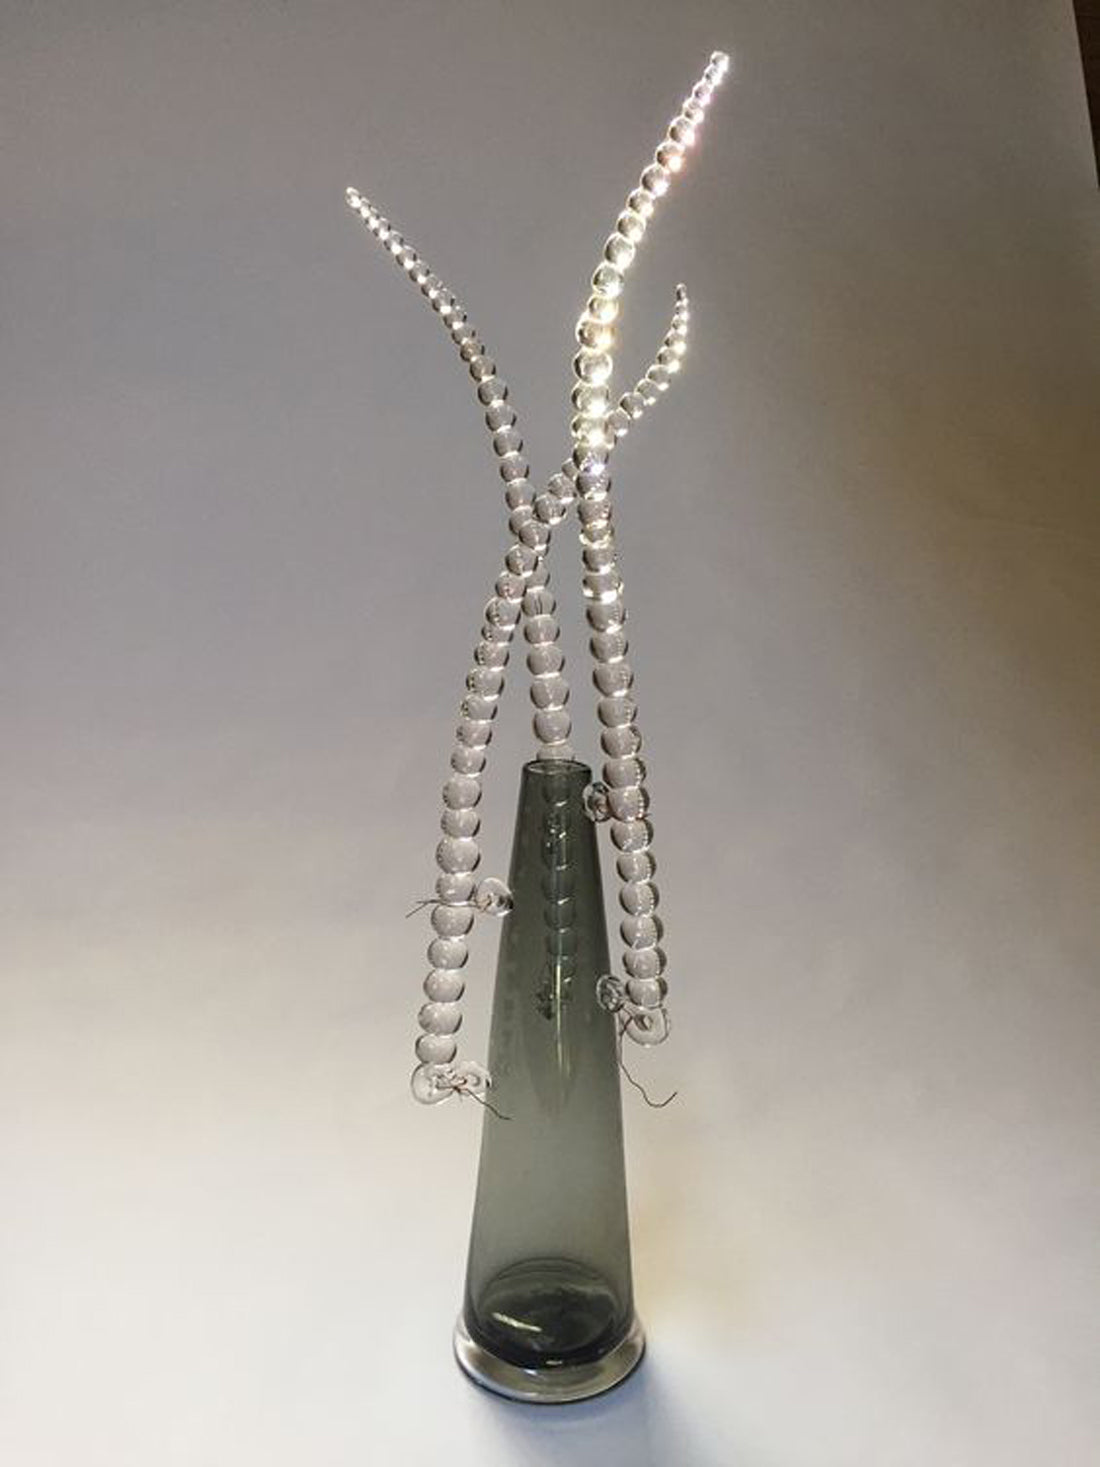 A green glass vase with three branches of clear glass beads.